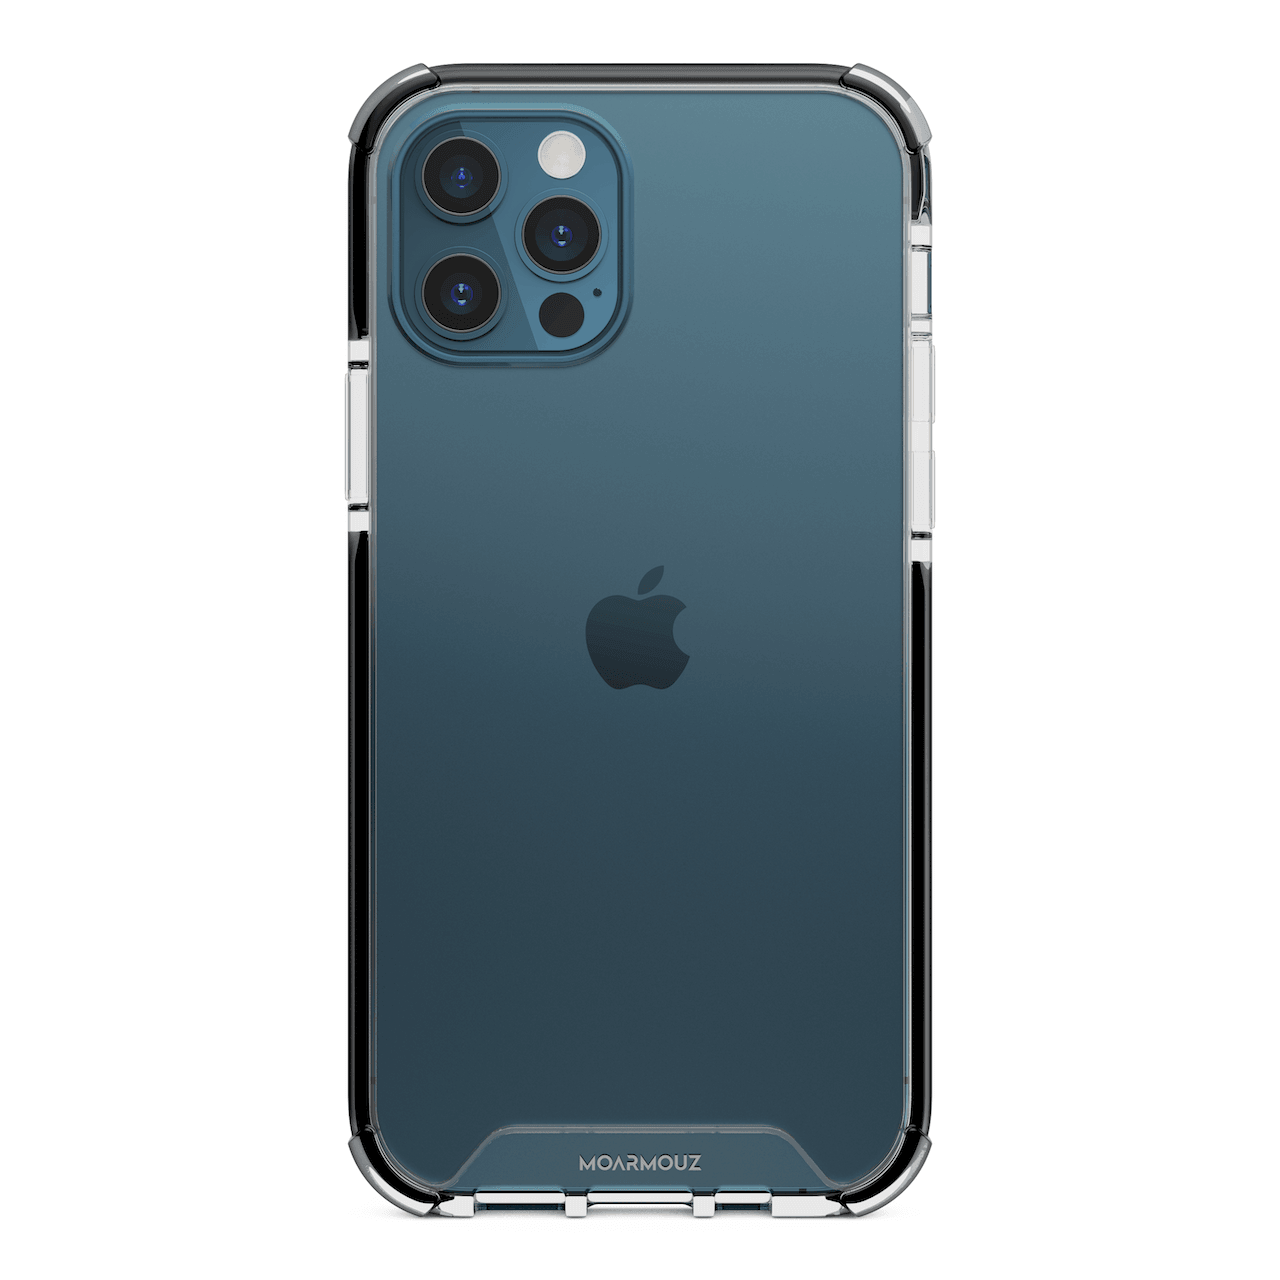 MoArmouz - Shockproof Case for iPhone 12 Pro Max